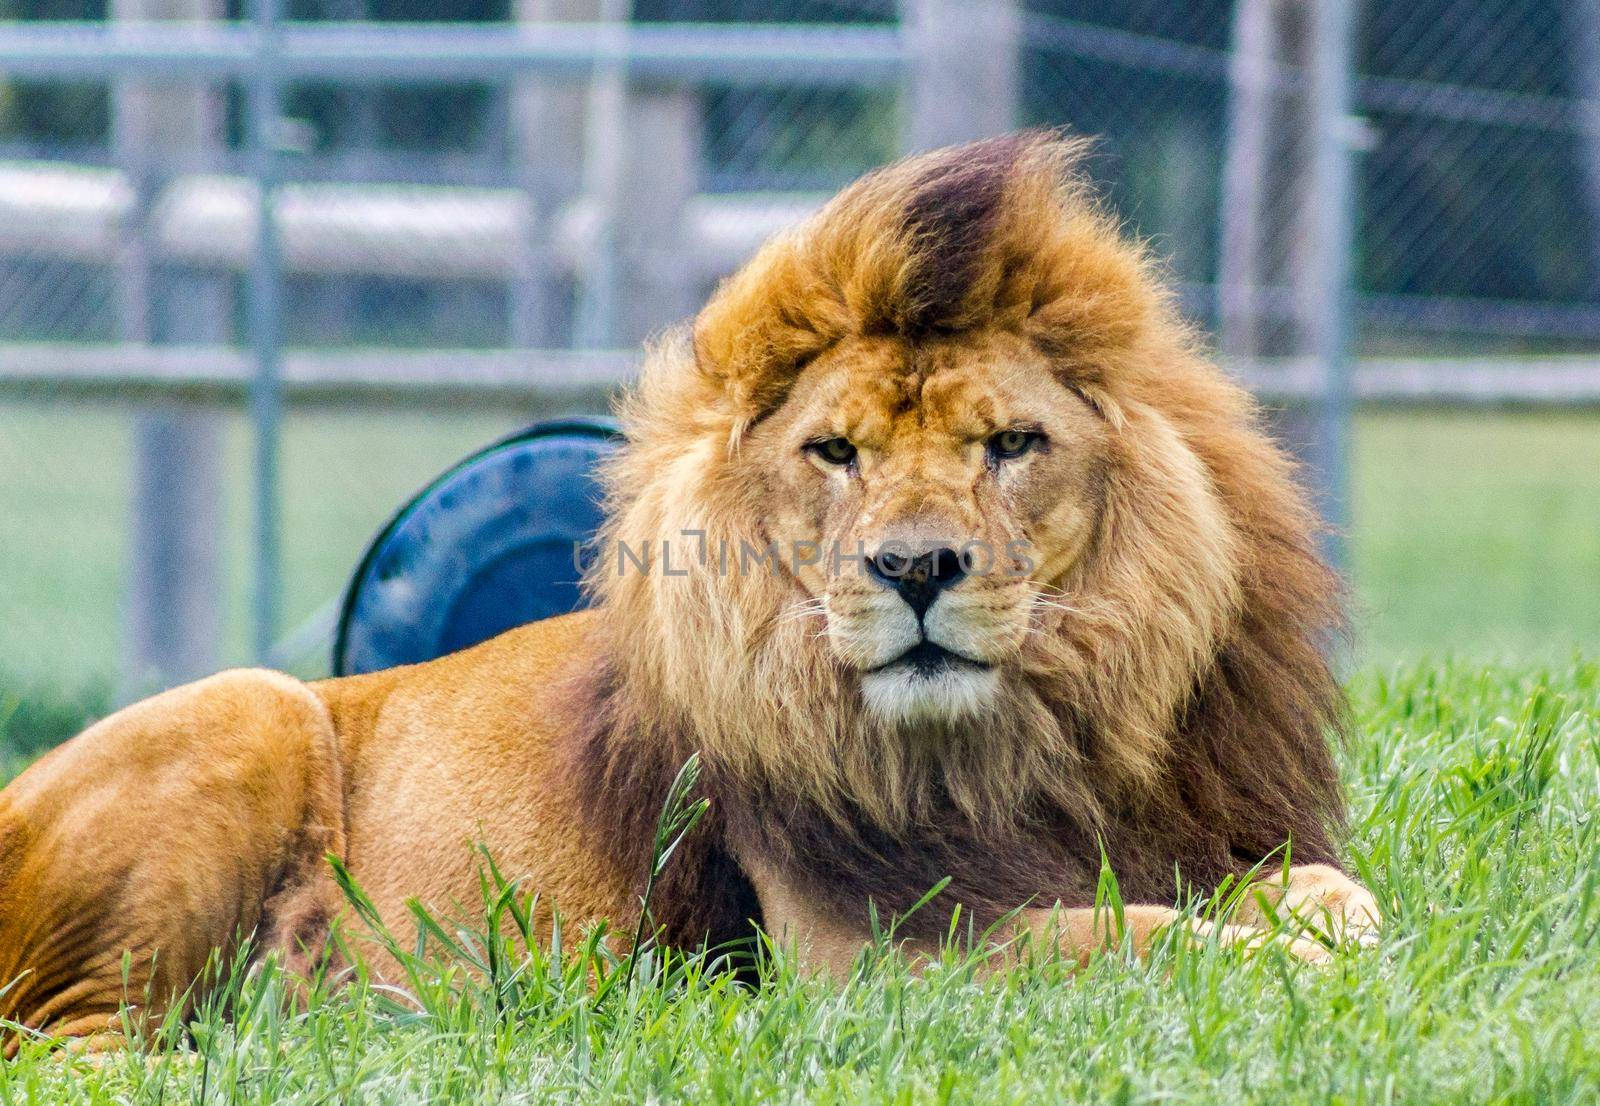 Single lion looking at camera in a zoo by bettercallcurry